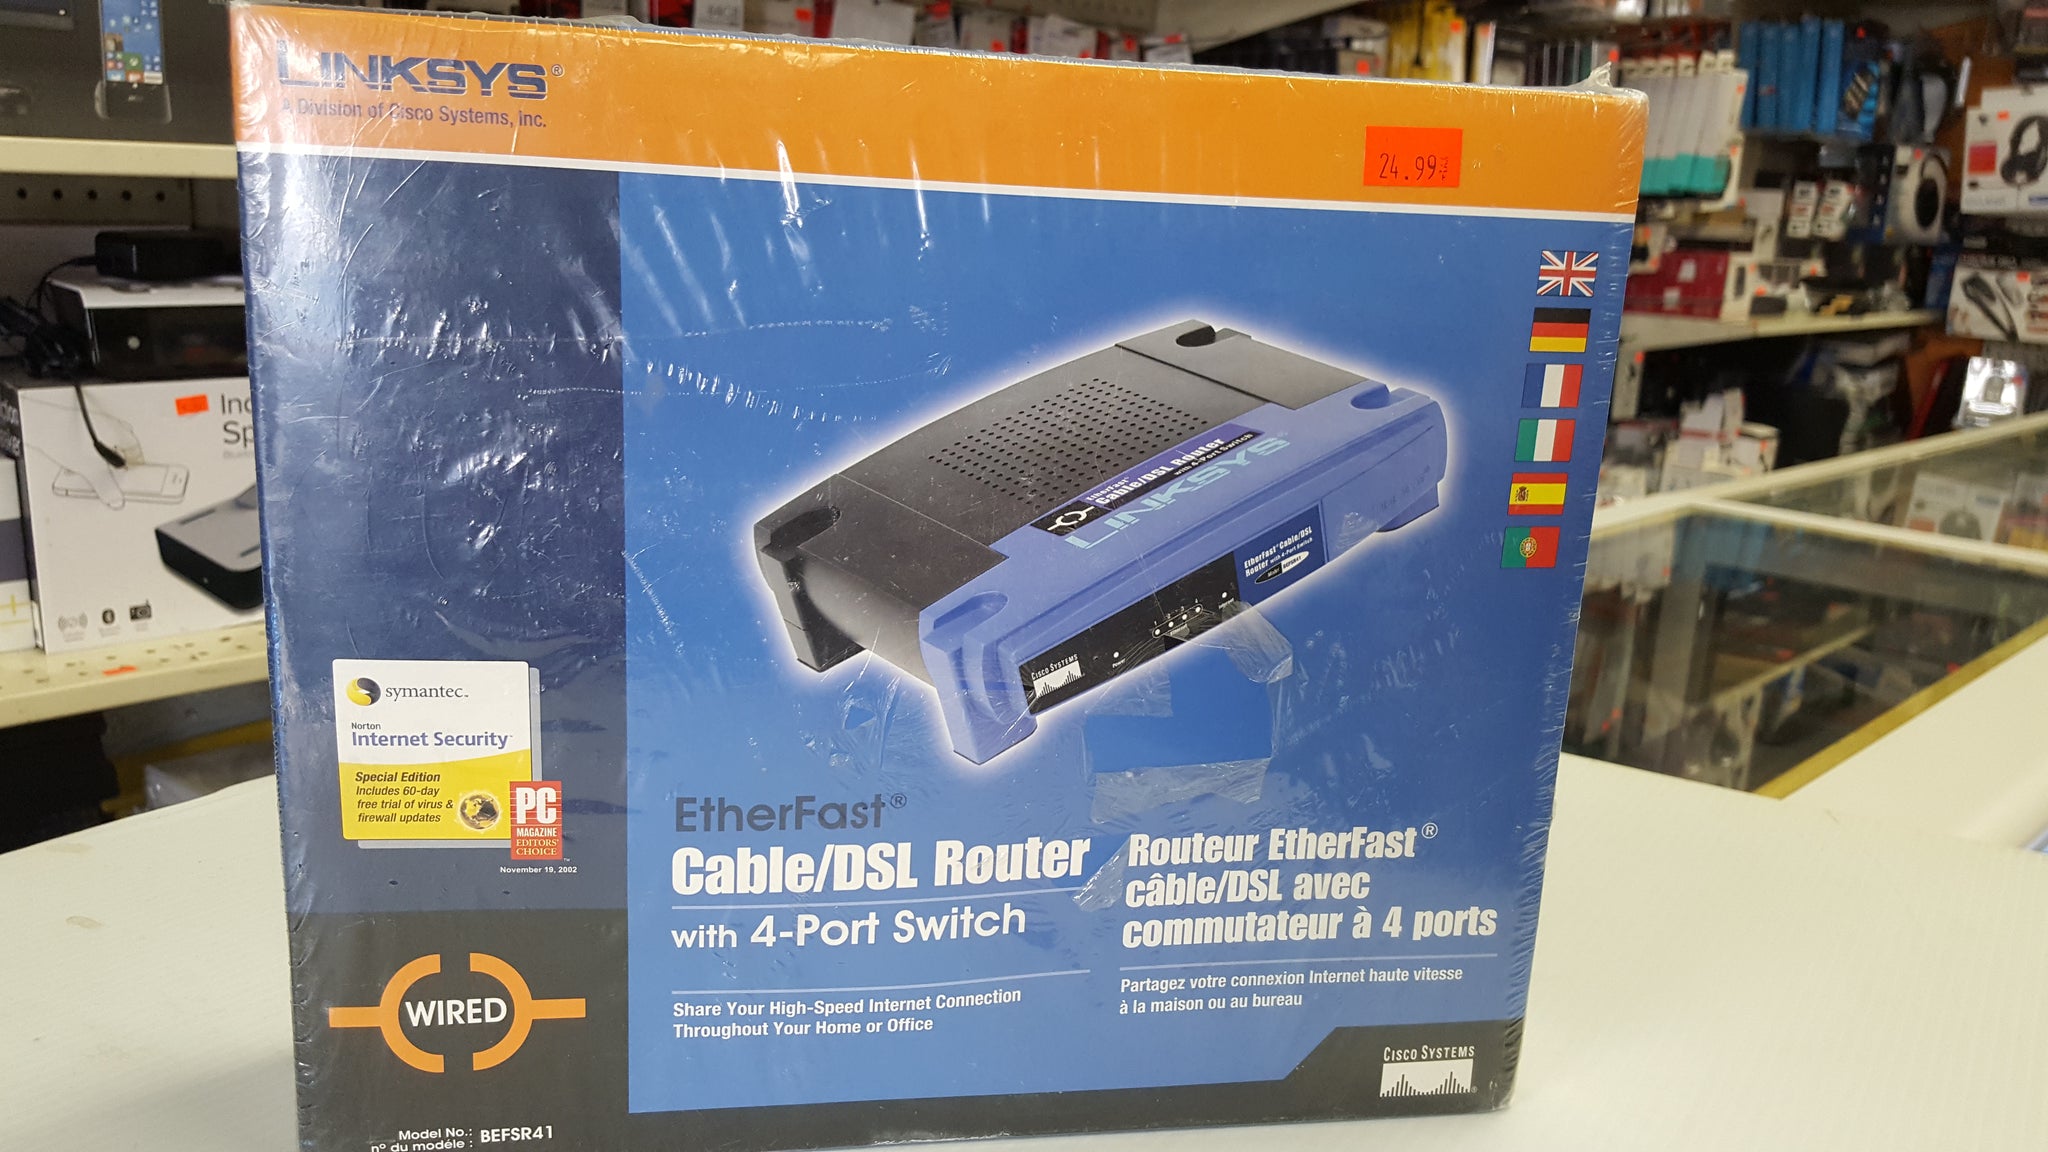 Linksys Befsr41 V3 Etherfast Cable Dsl Router With 4 Port Switch In Retail Box